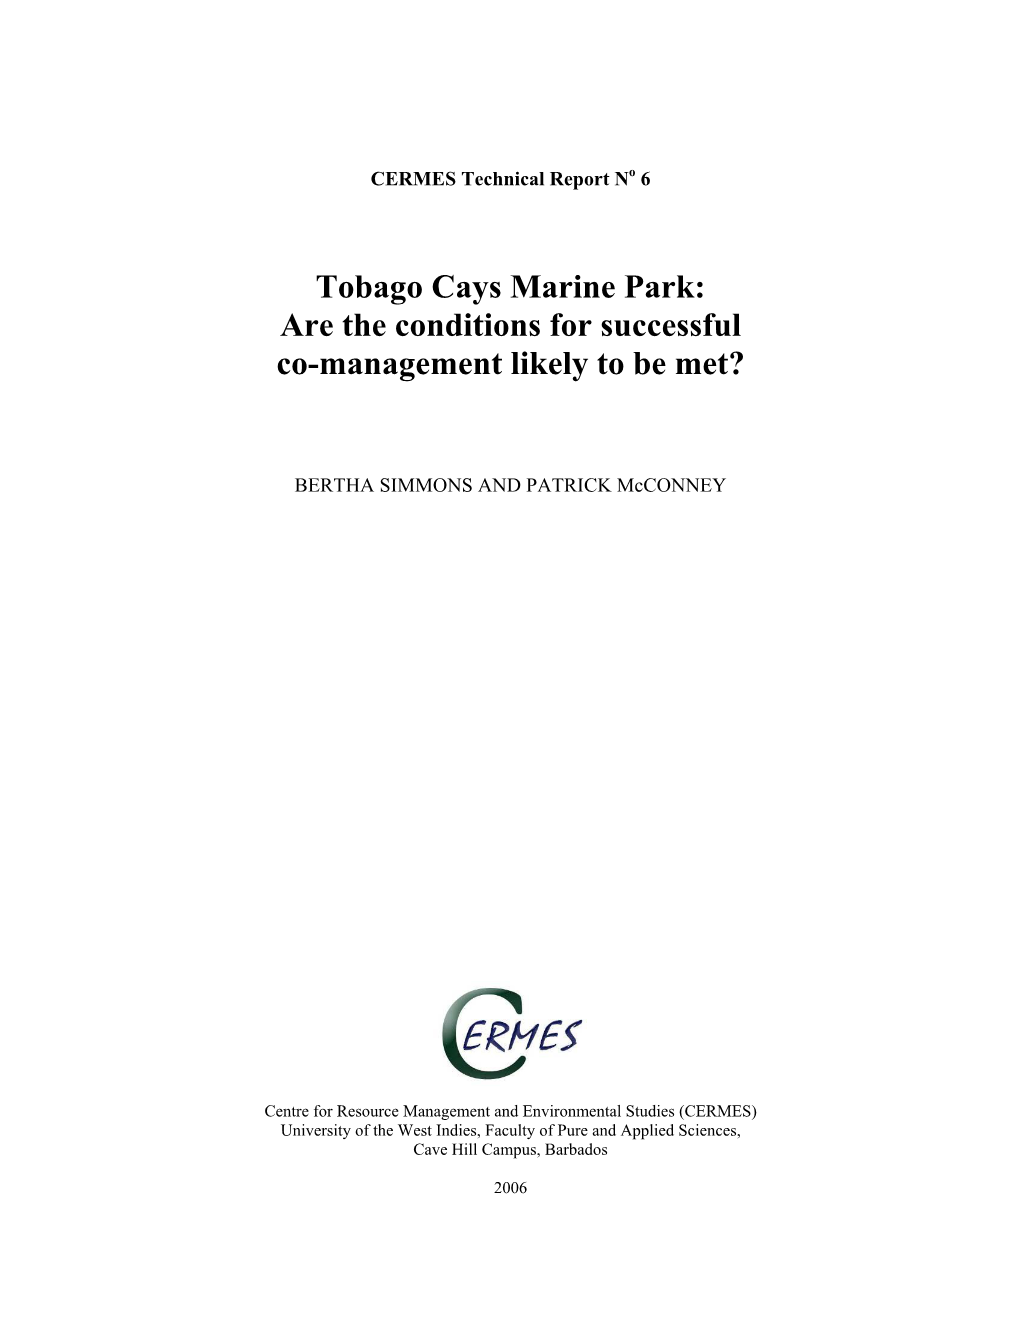 Tobago Cays Marine Park: Are the Conditions for Successful Co-Management Likely to Be Met?